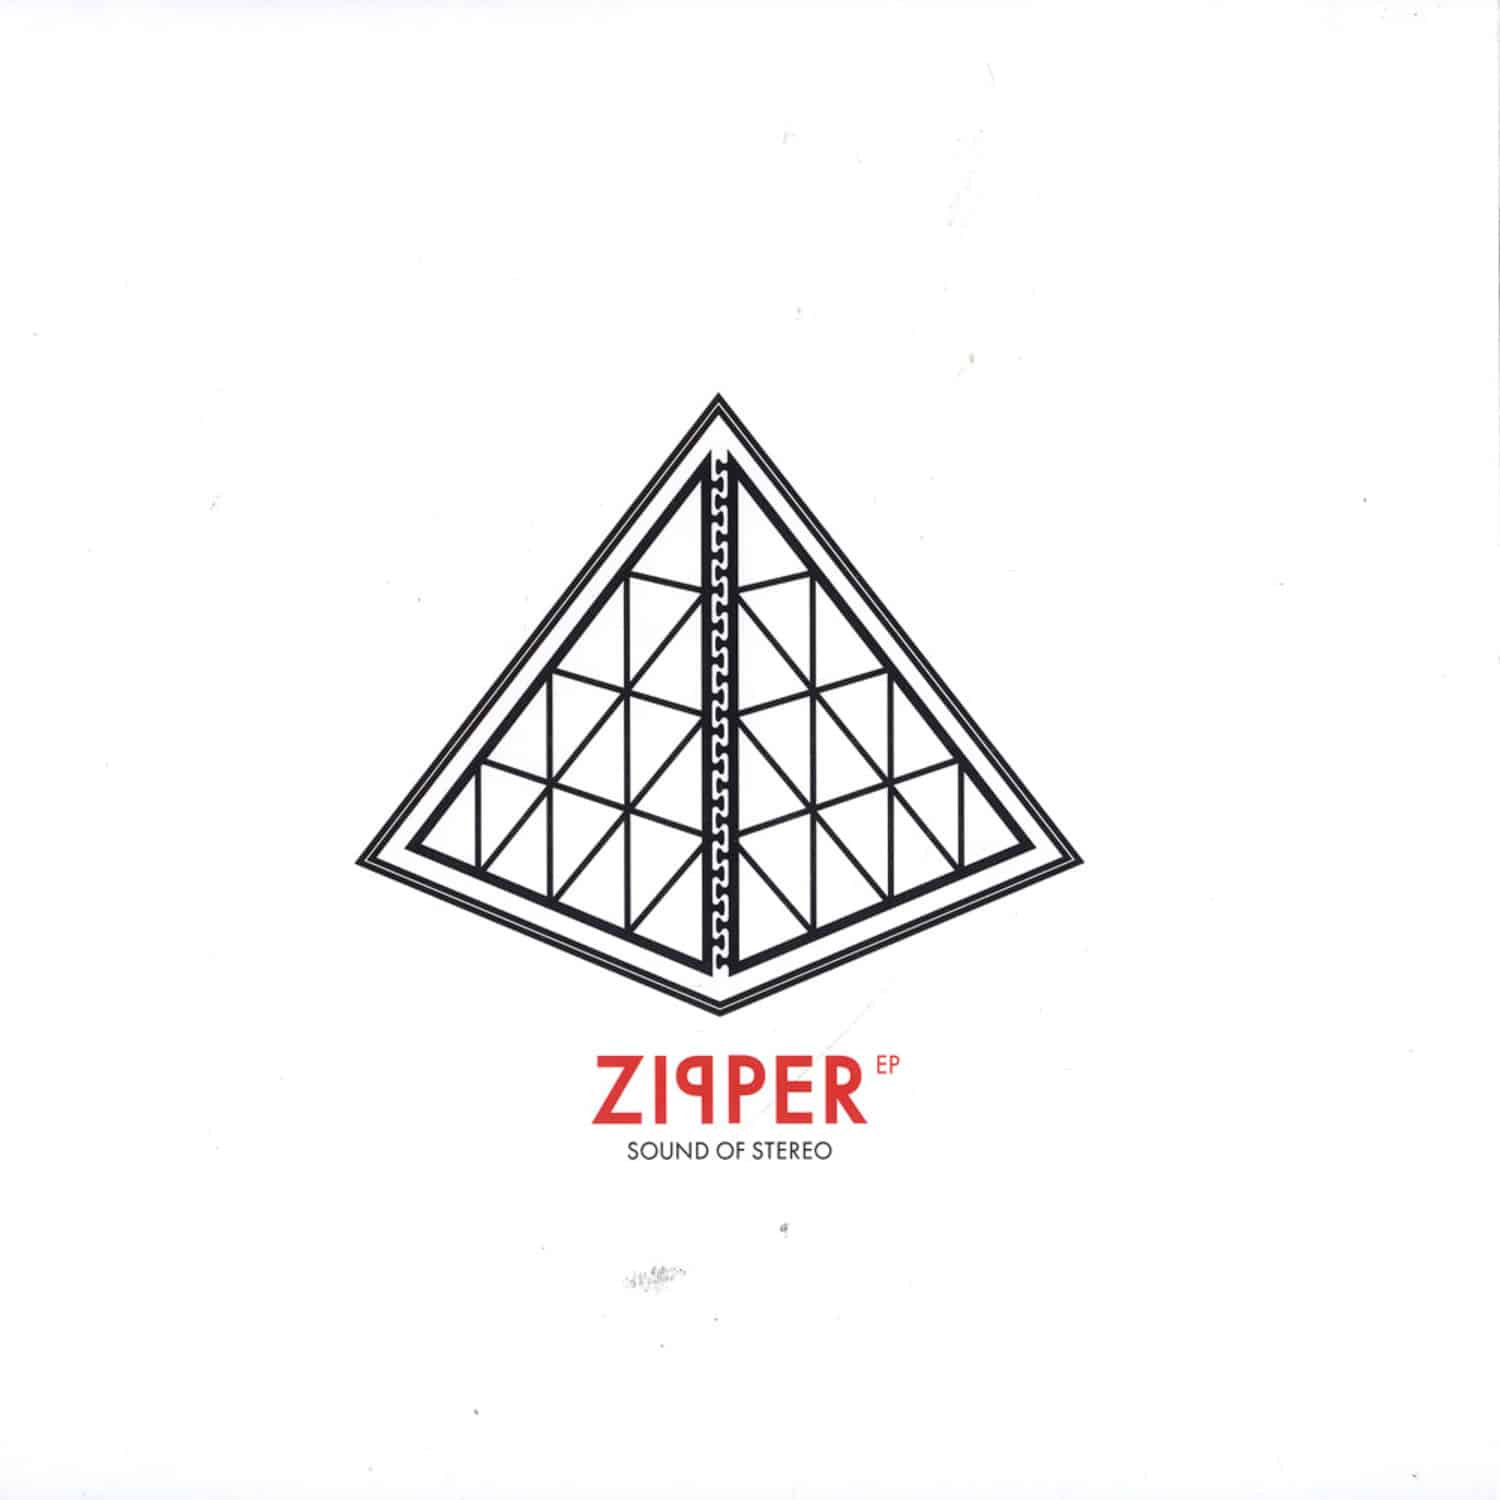 Sound Of Stereo - ZIPPER EP